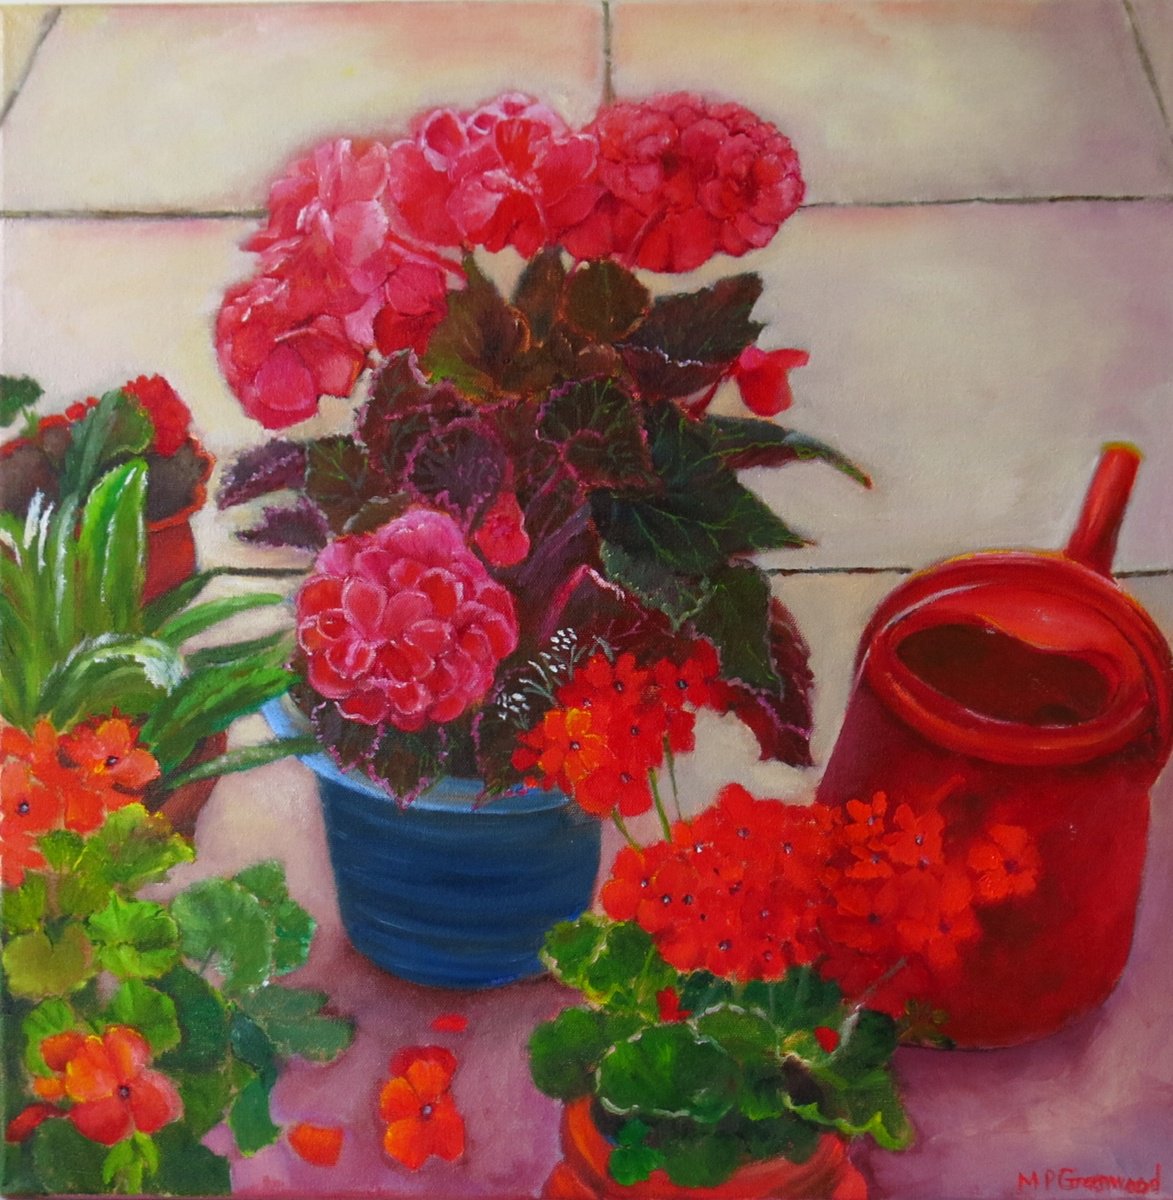 Begonias and Geraniums on my Patio by Maureen Greenwood